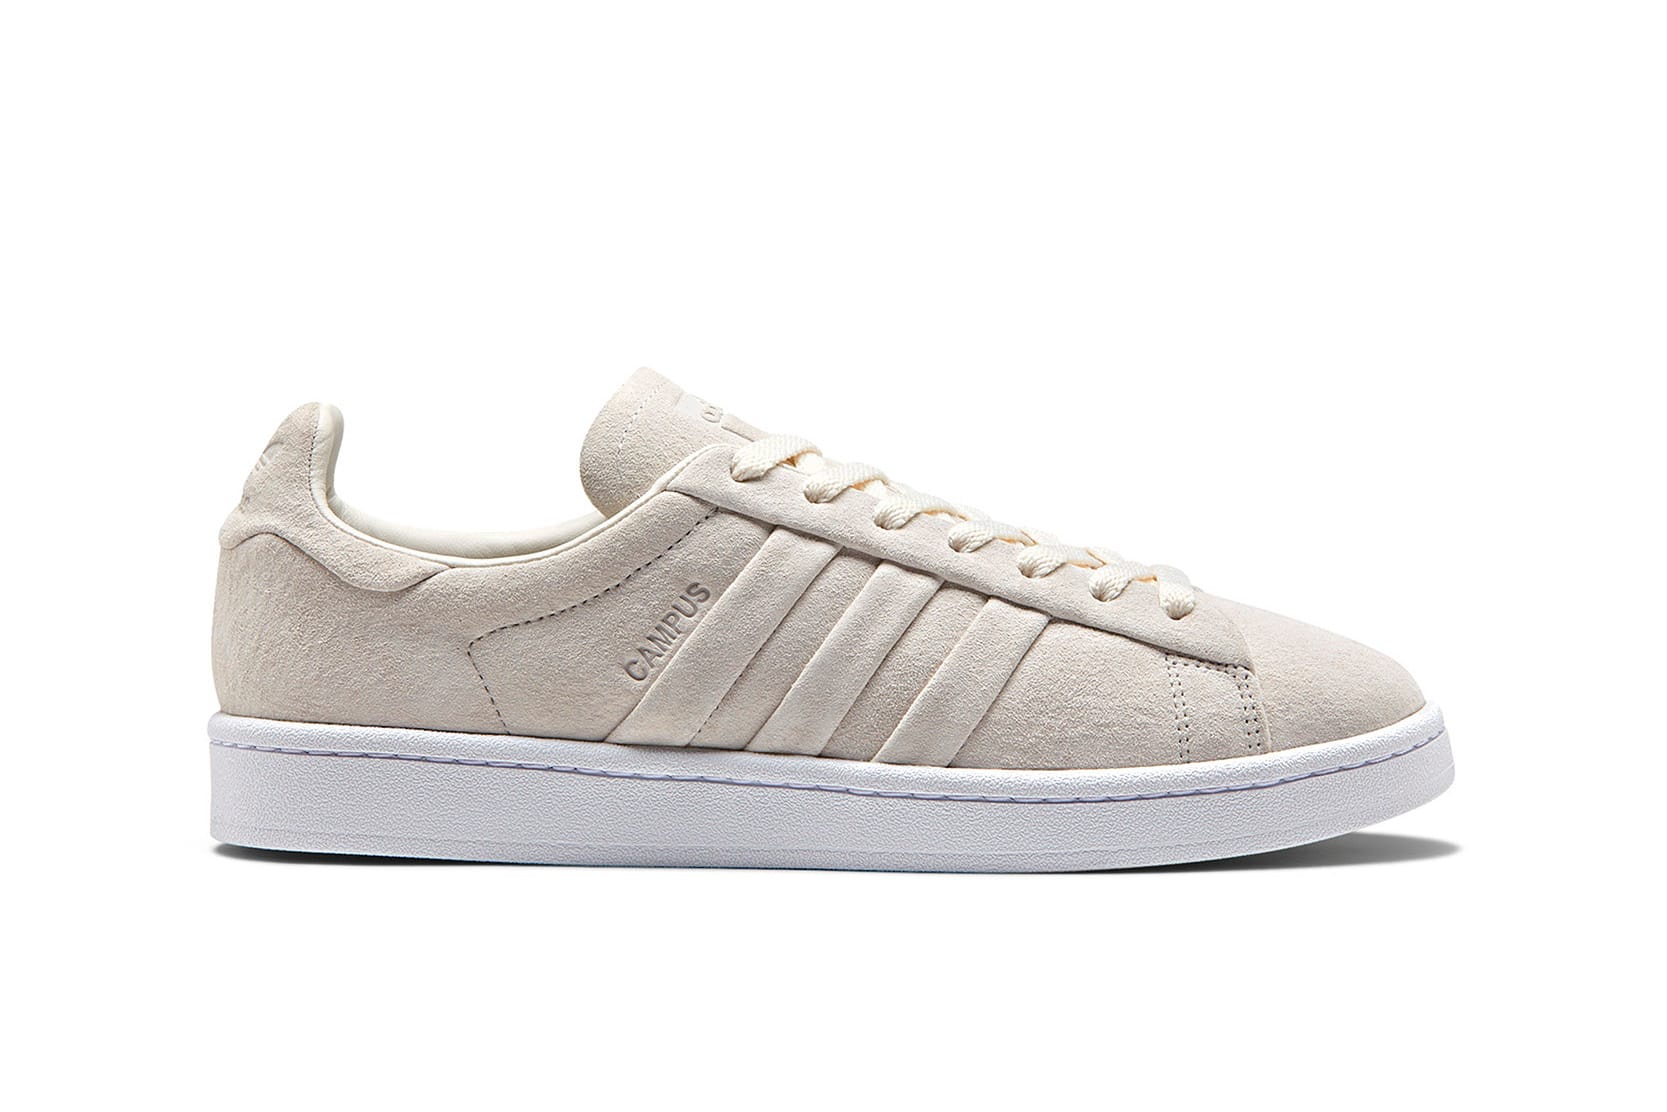 adidas campus gazelle difference